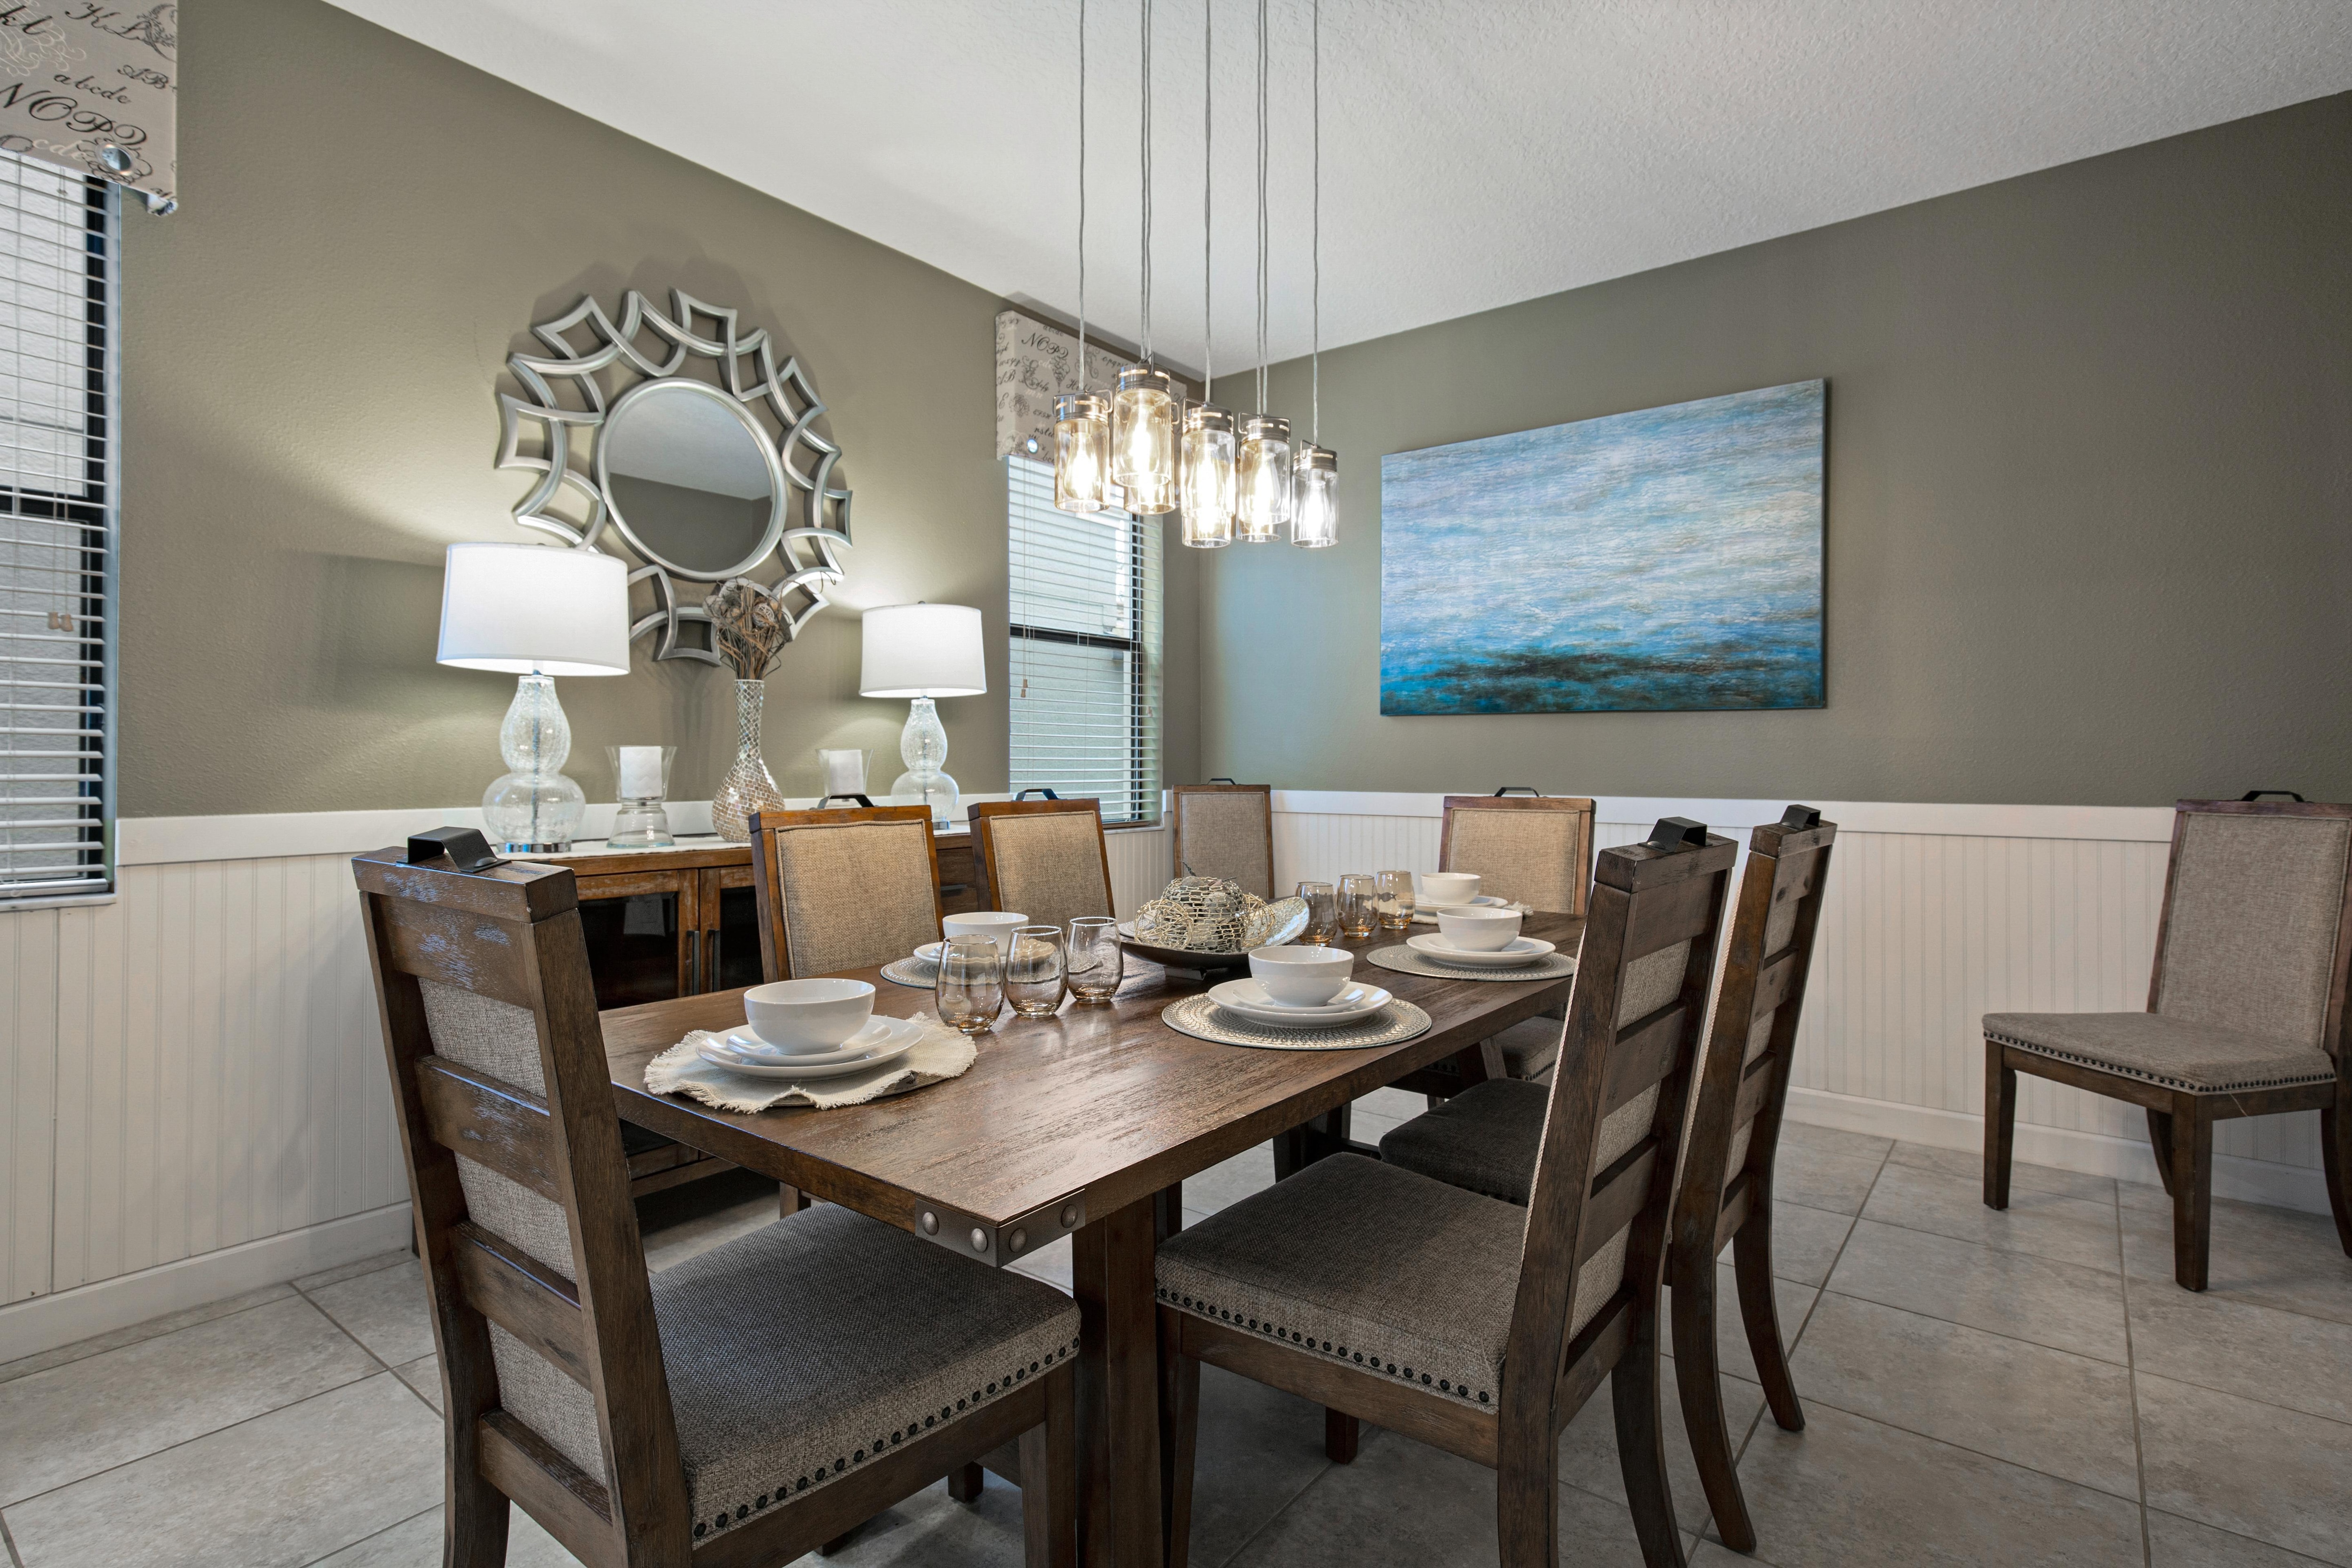 Elegant dining area with seating for 6